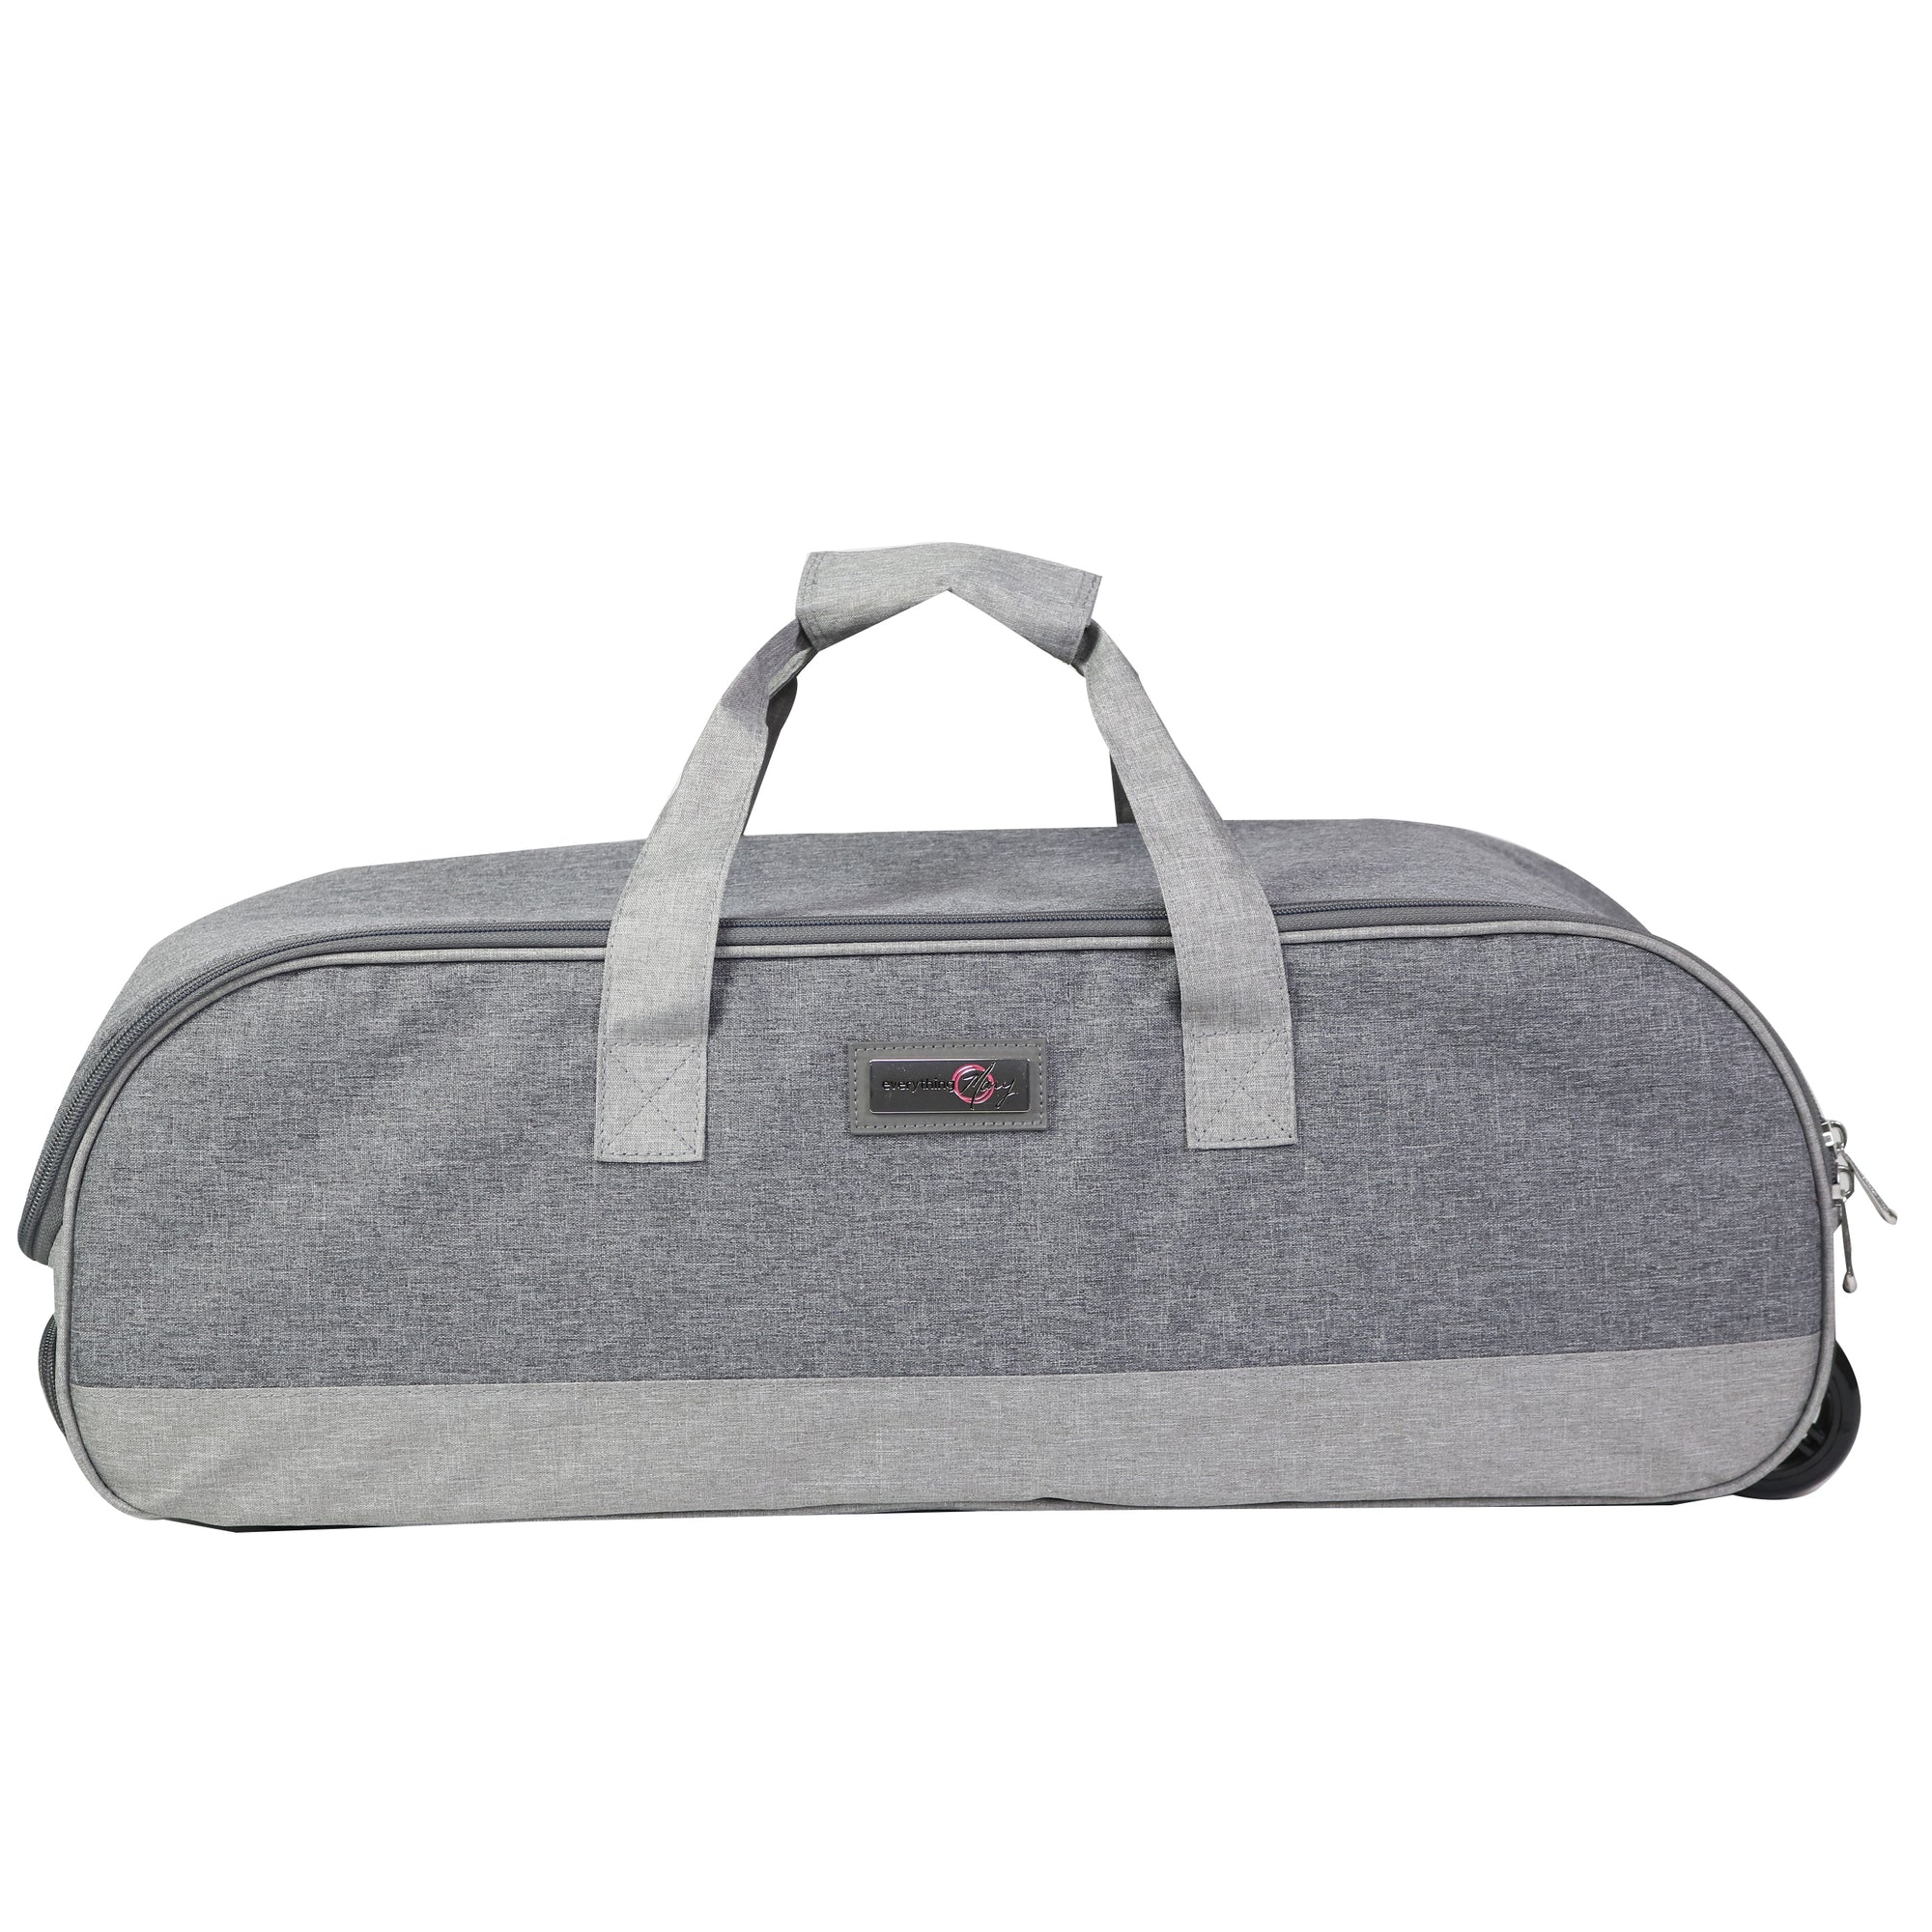  CURMIO Rolling Carrying Case with Wheels Compatible for Cricut  Explore Air 2, Cricut Maker and Silhouette Cameo 4, Double Layers Craft  Tote Bag with Pockets for Craft Supplies, Gray (Bag Only) 